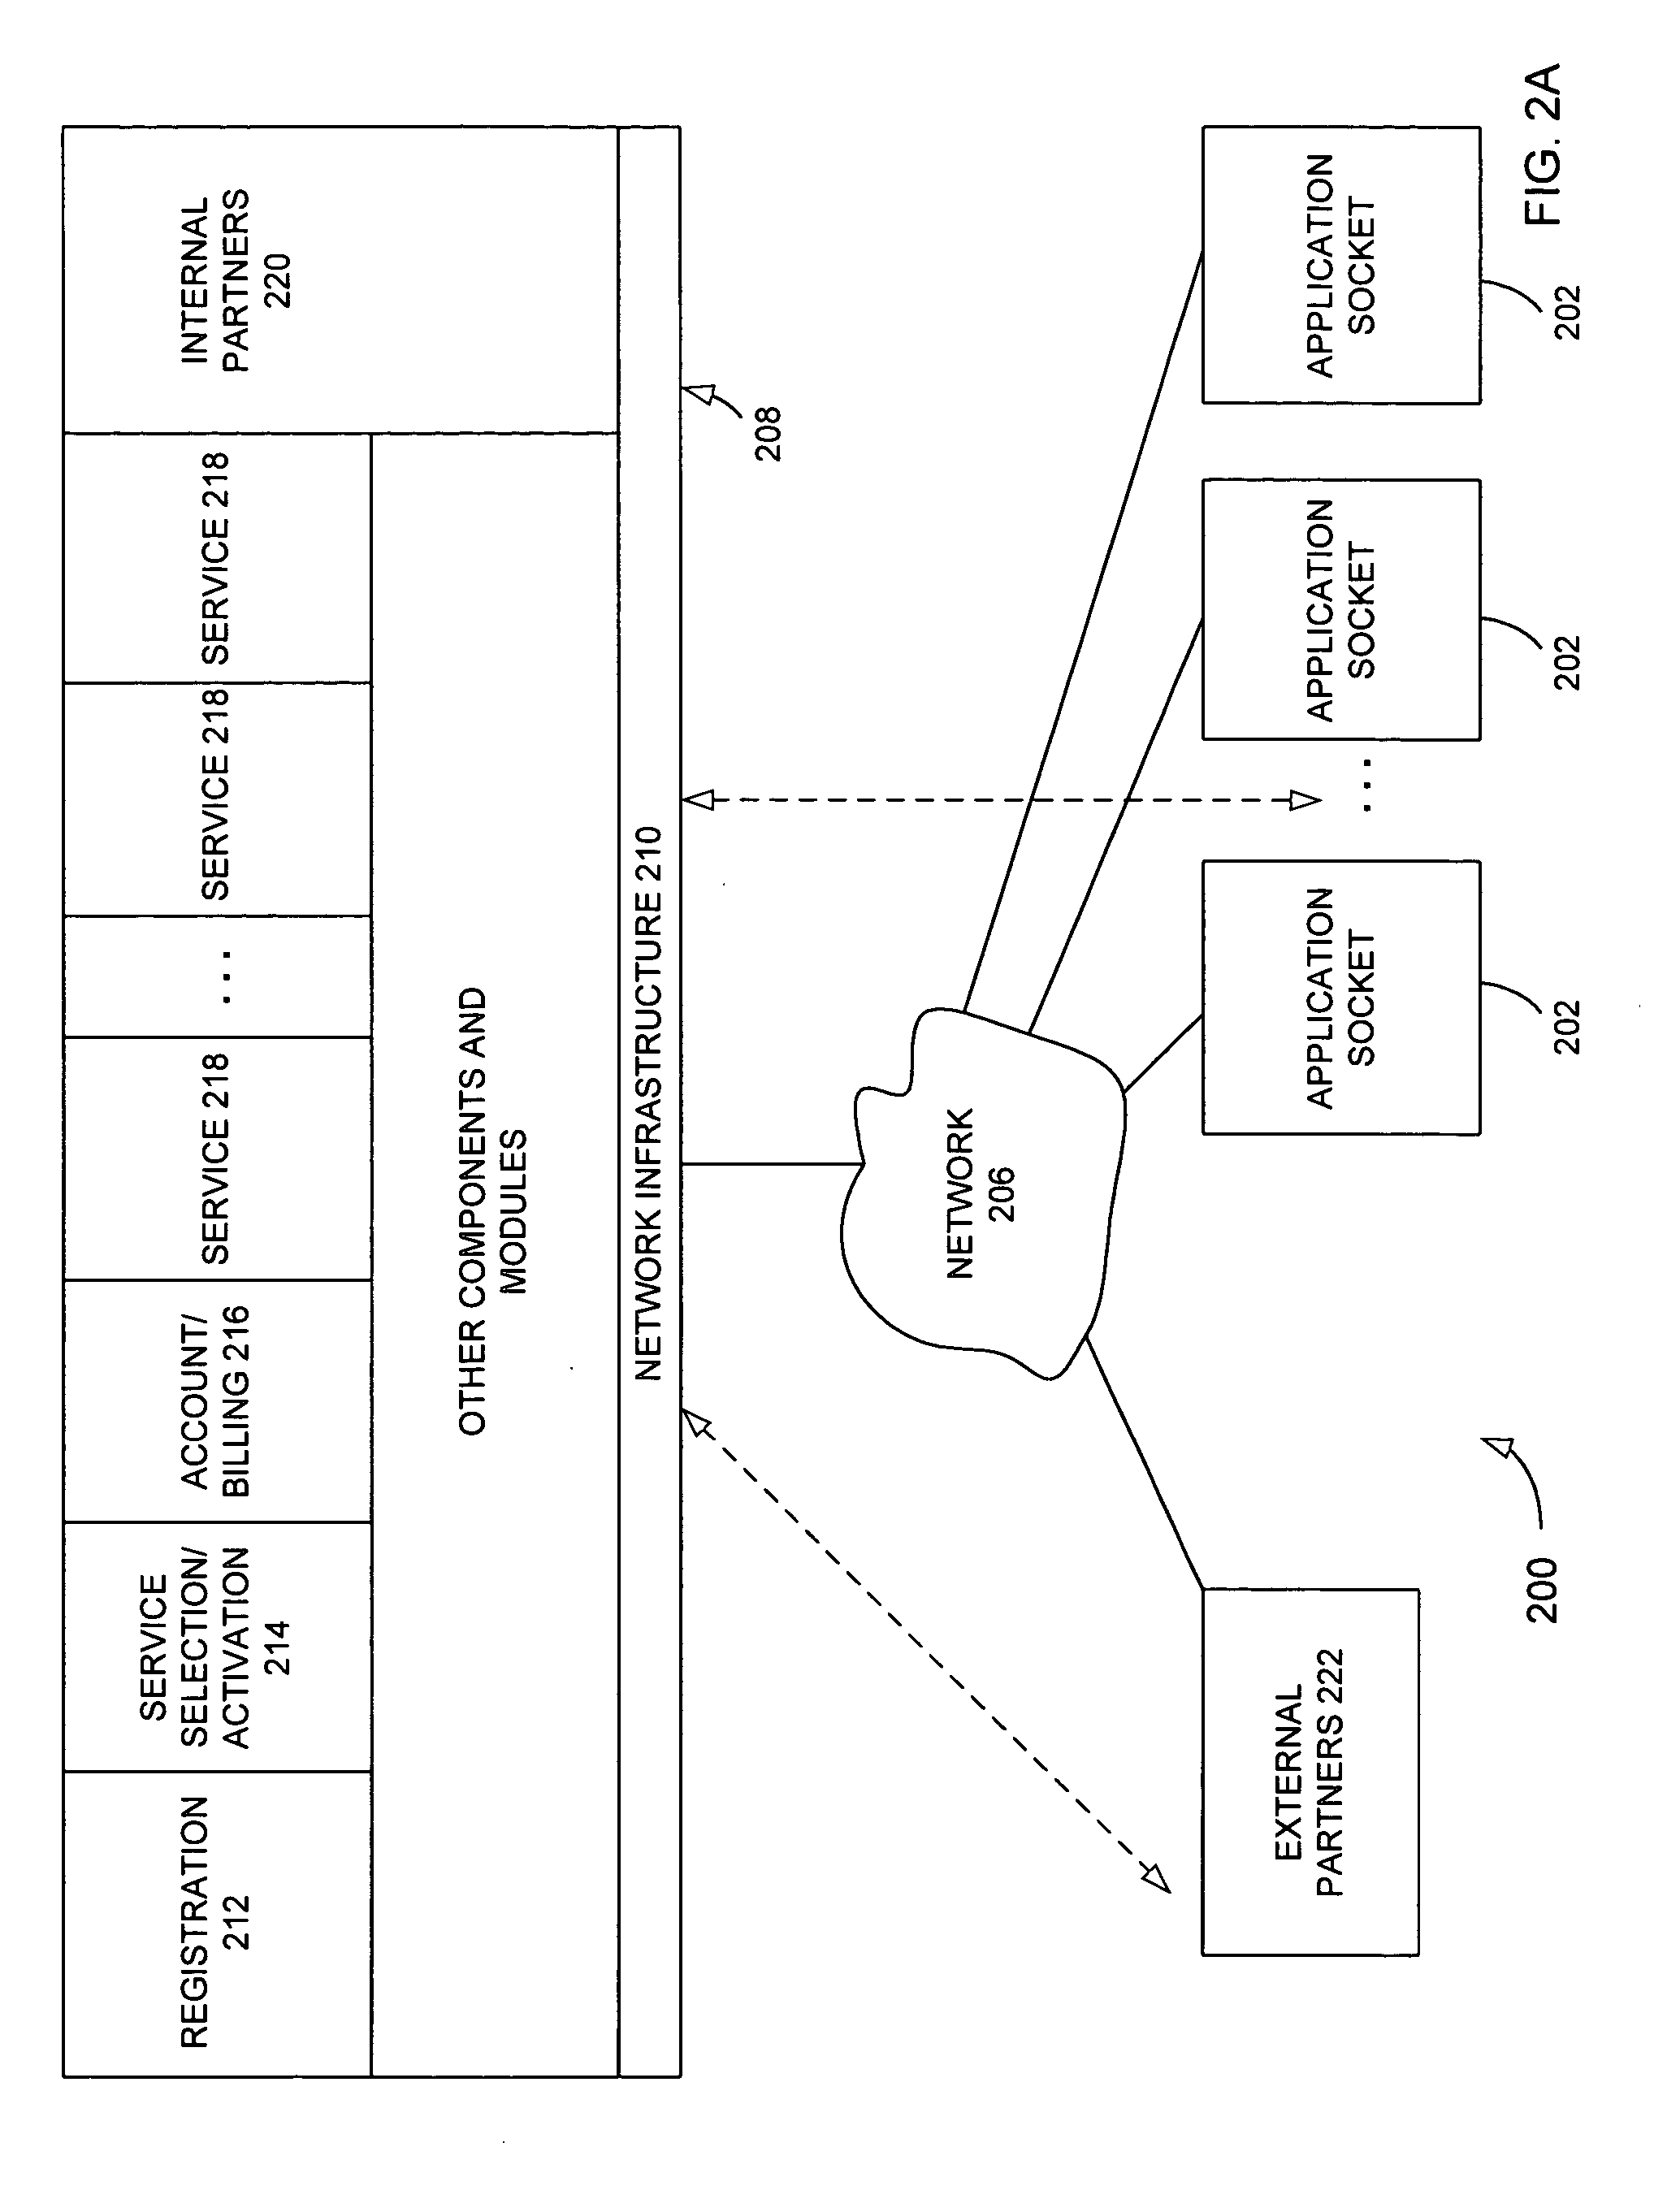 Systems and methods for enhancing security of communication over a public network